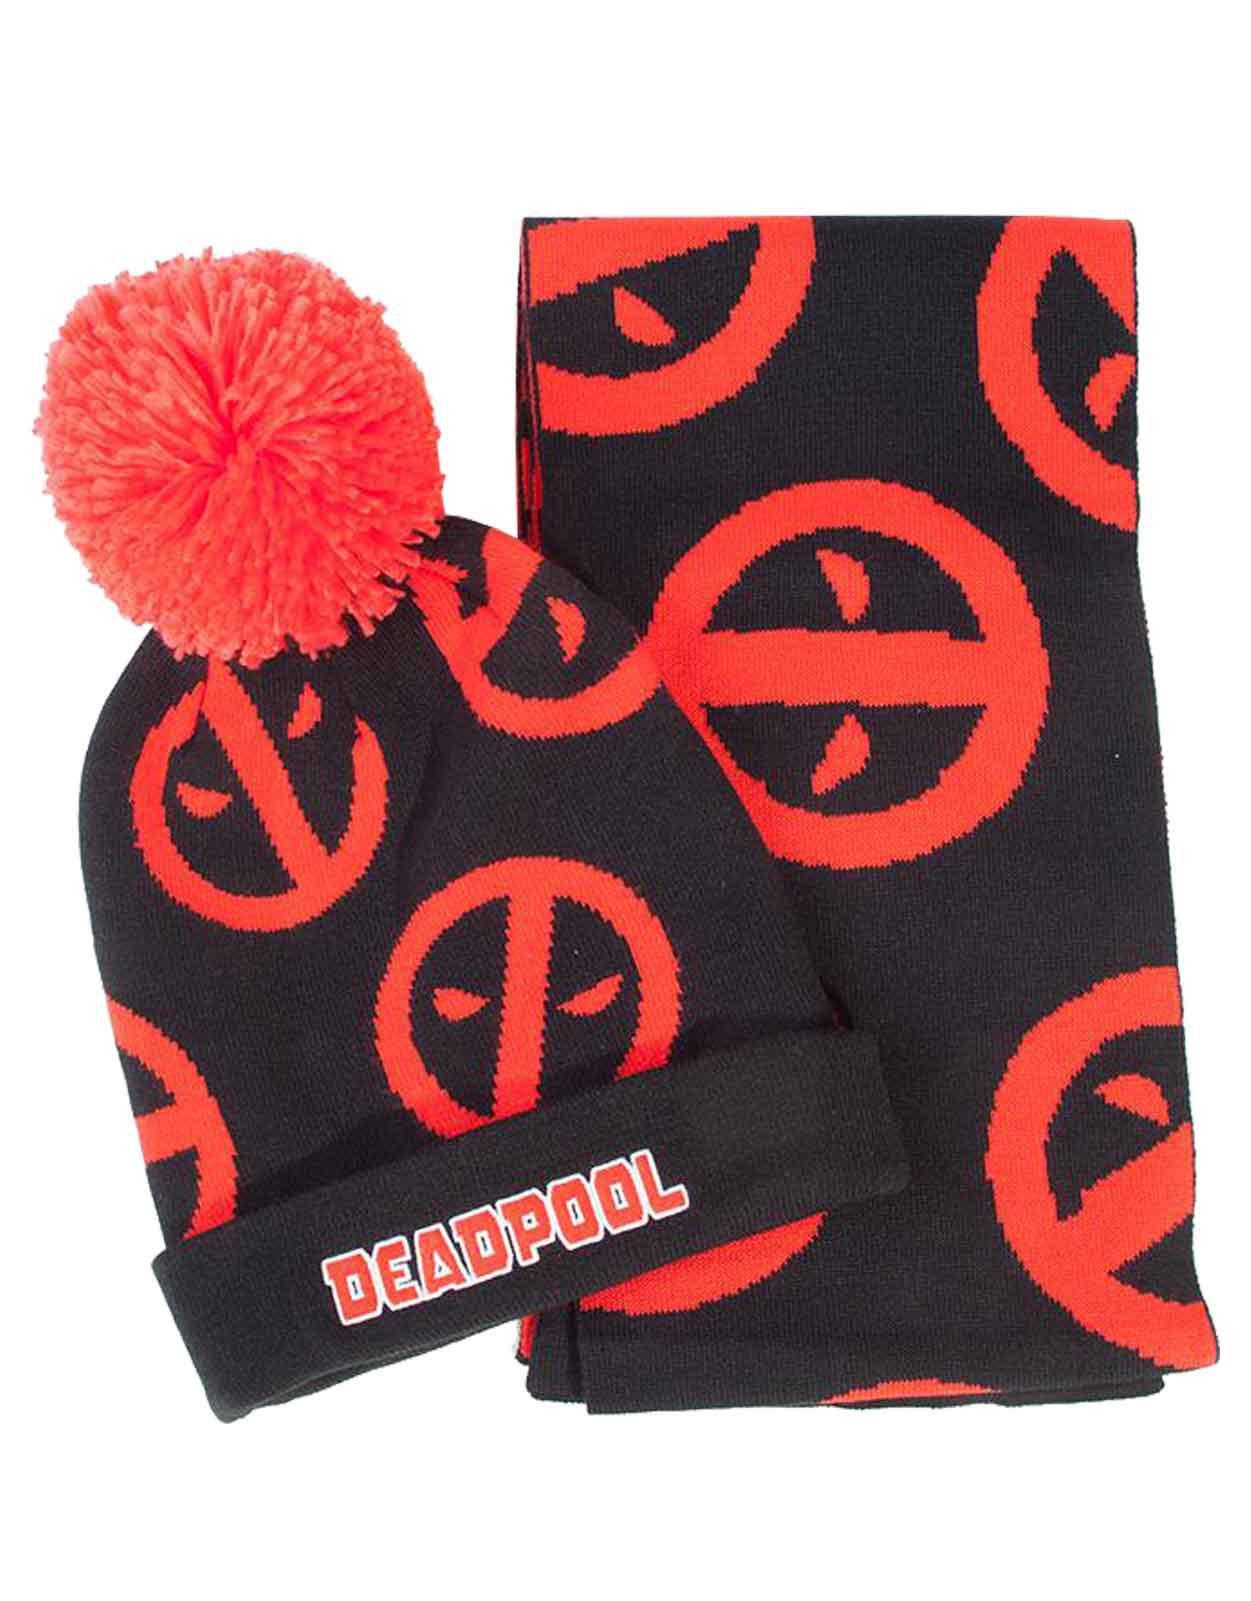 Deadpool Beanie Scarf Gift Set Angry Face Symbol new Official Marvel Unisex